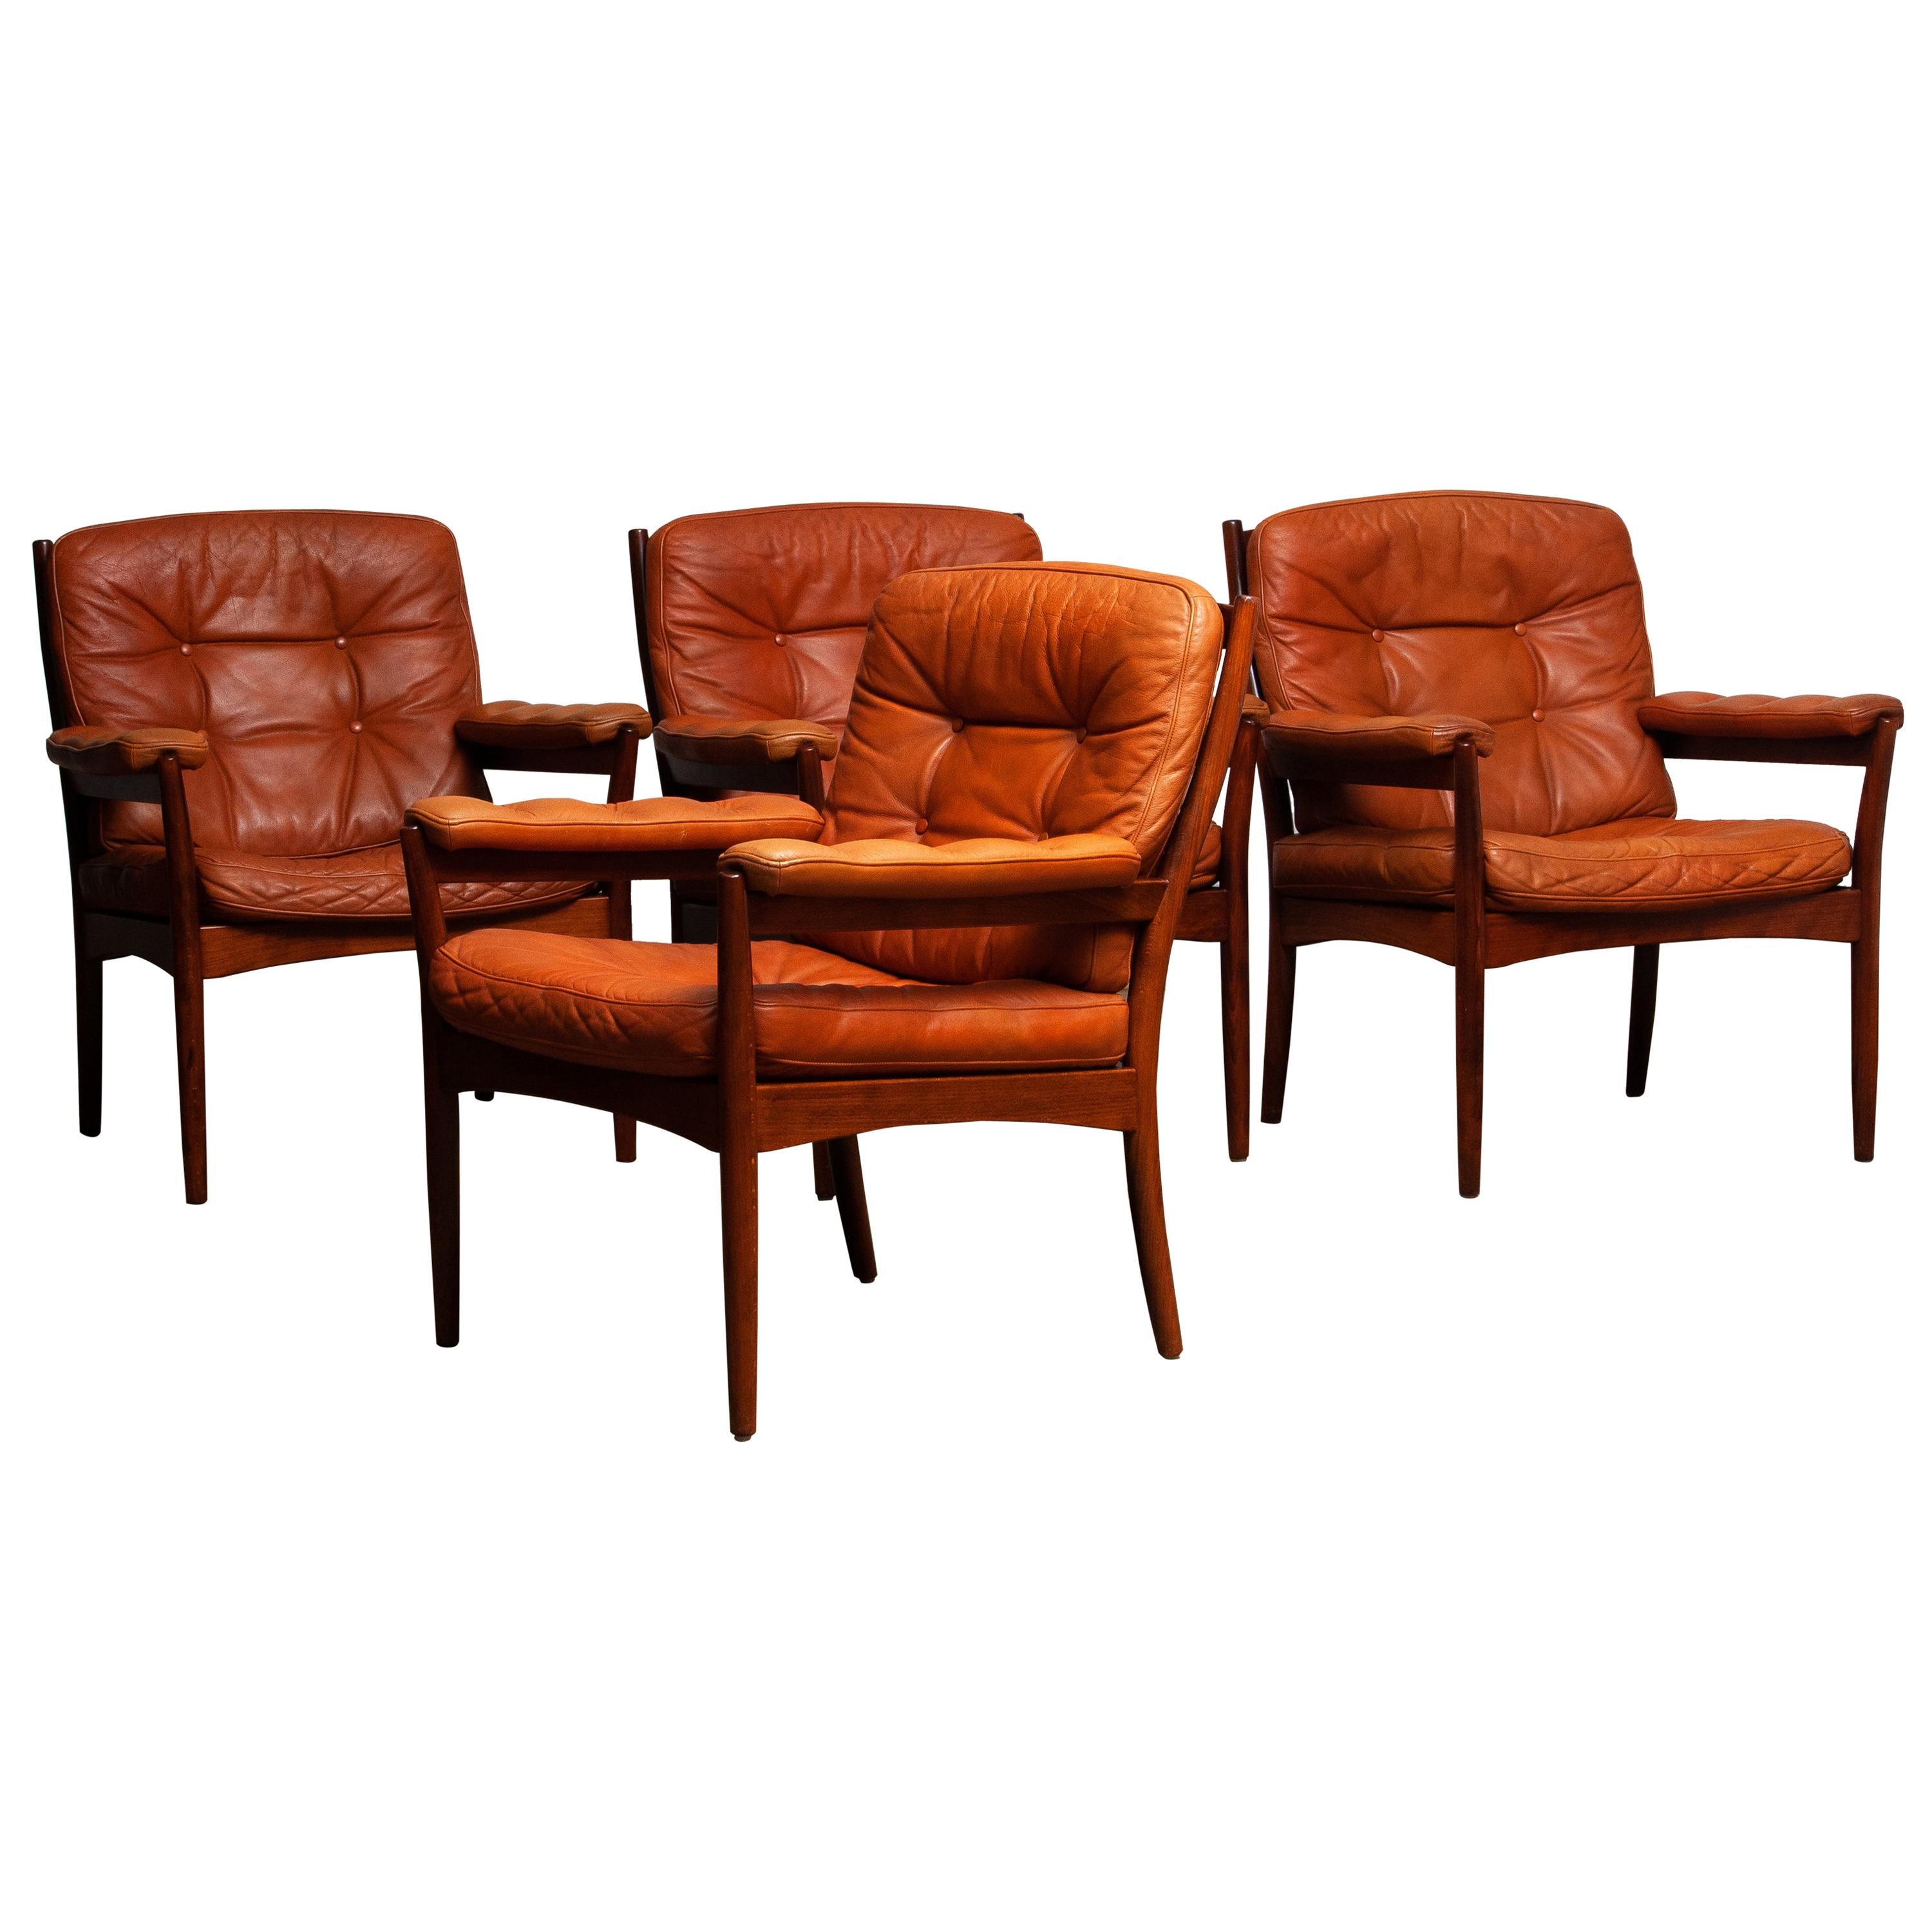 Set of four comfortable easy / lounge chairs, model 